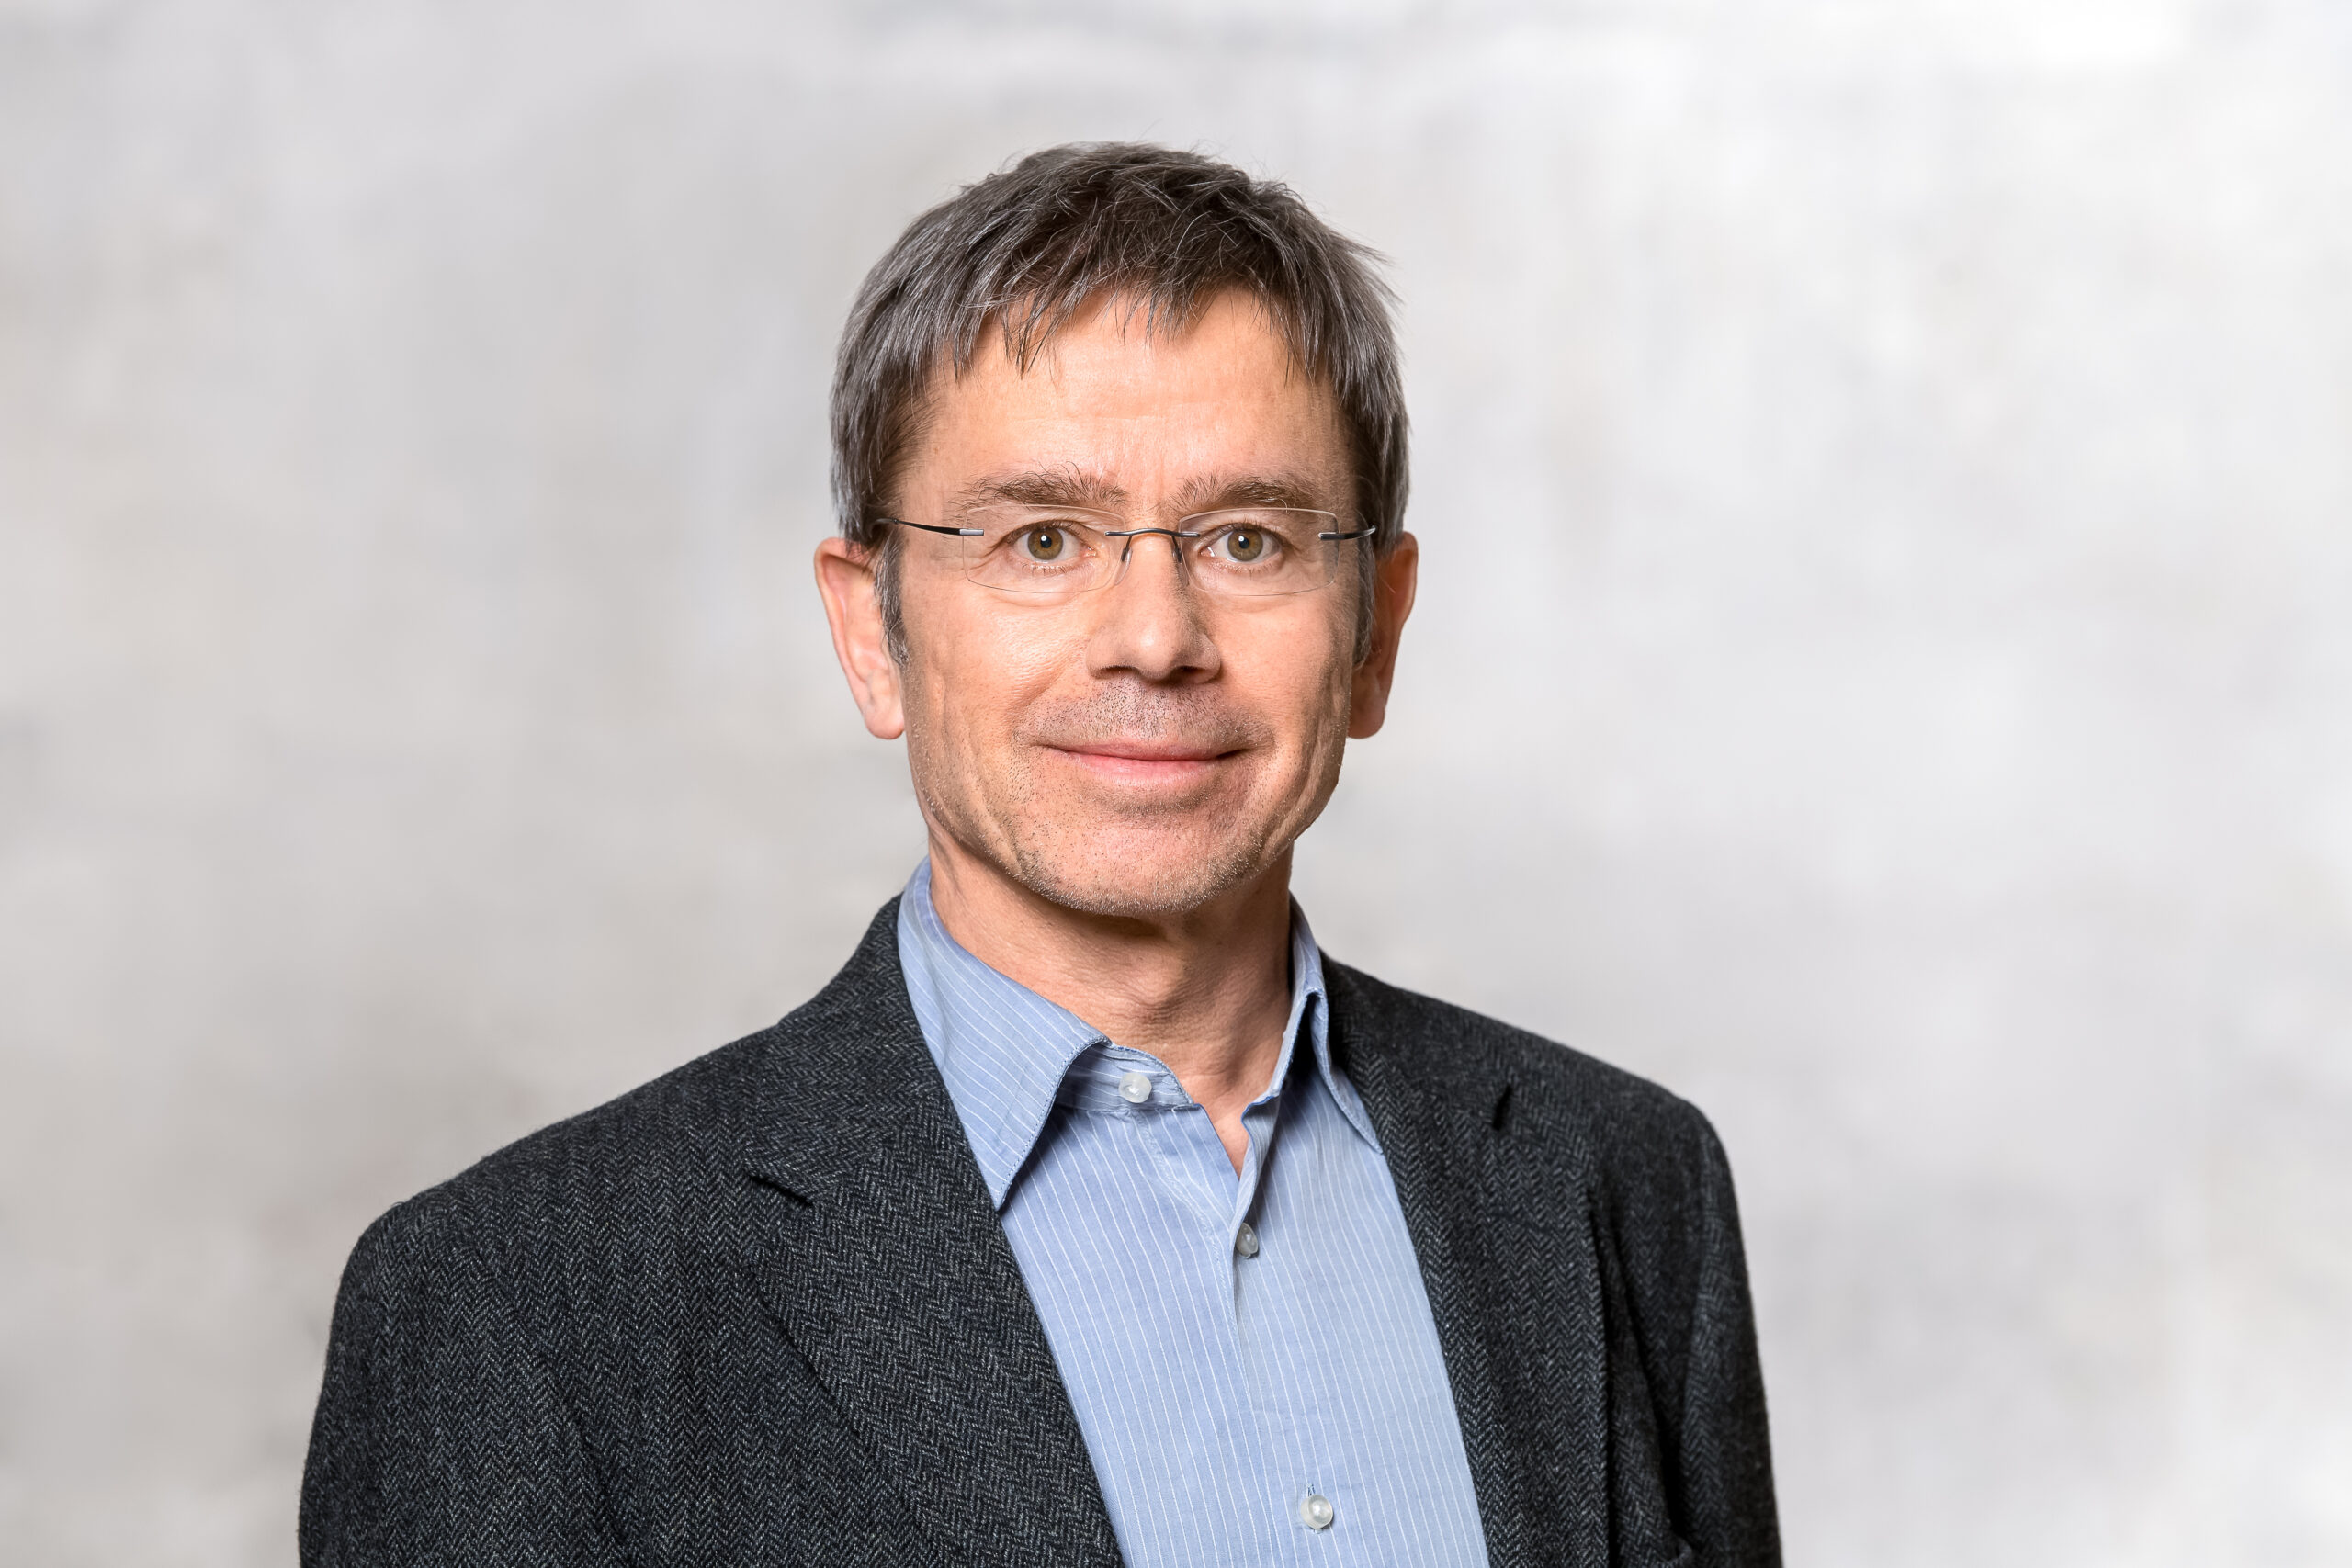 Photo of Prof Stefan Rahmstorf wearing a dark suit and a blue shirt against a grey background